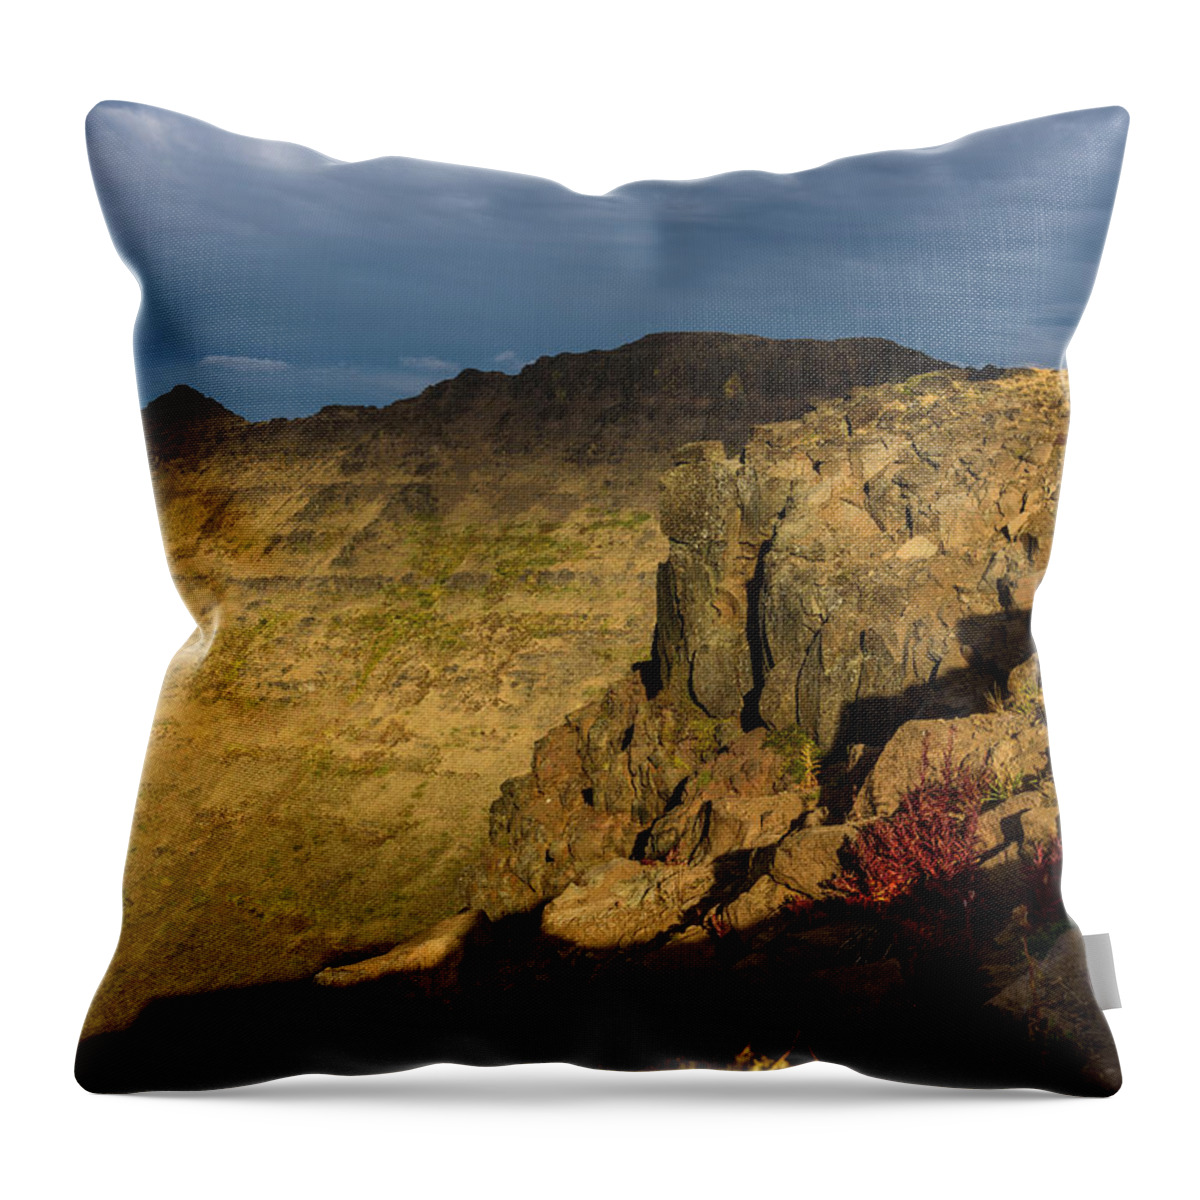 Eastern Oregon Throw Pillow featuring the photograph Kiger Gorge by Robert Potts